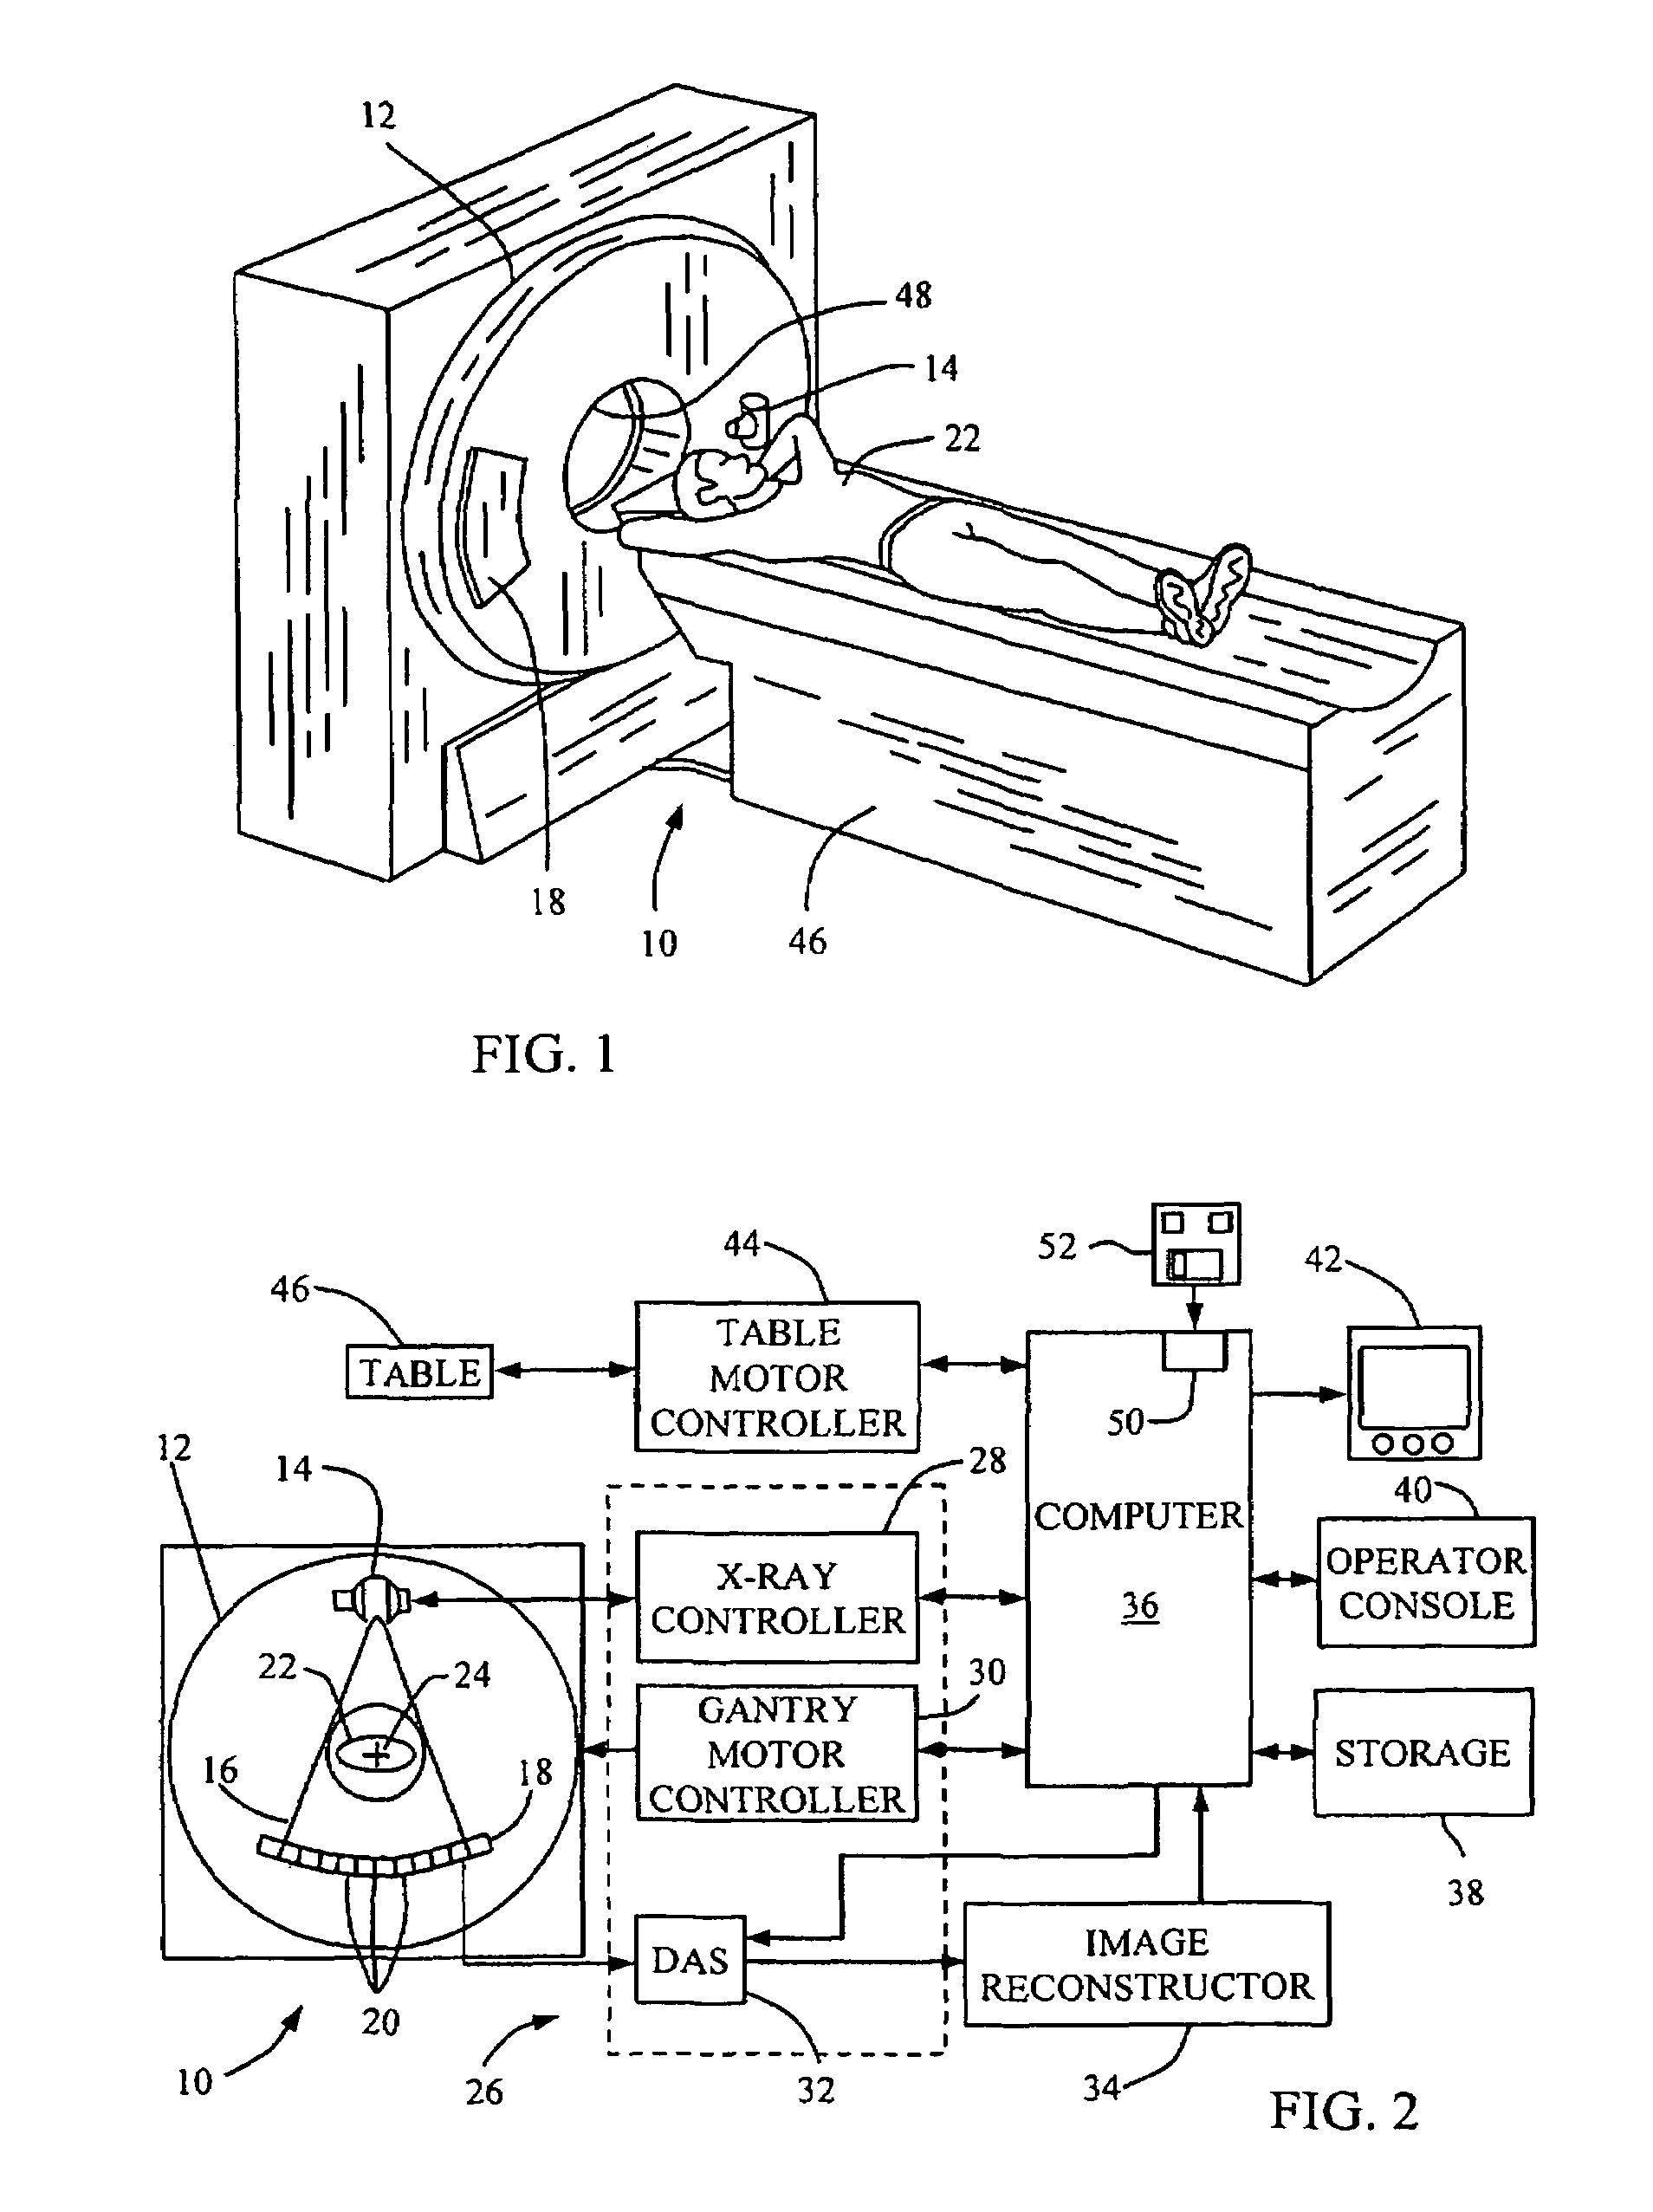 Module assembly for multiple die back-illuminated diode